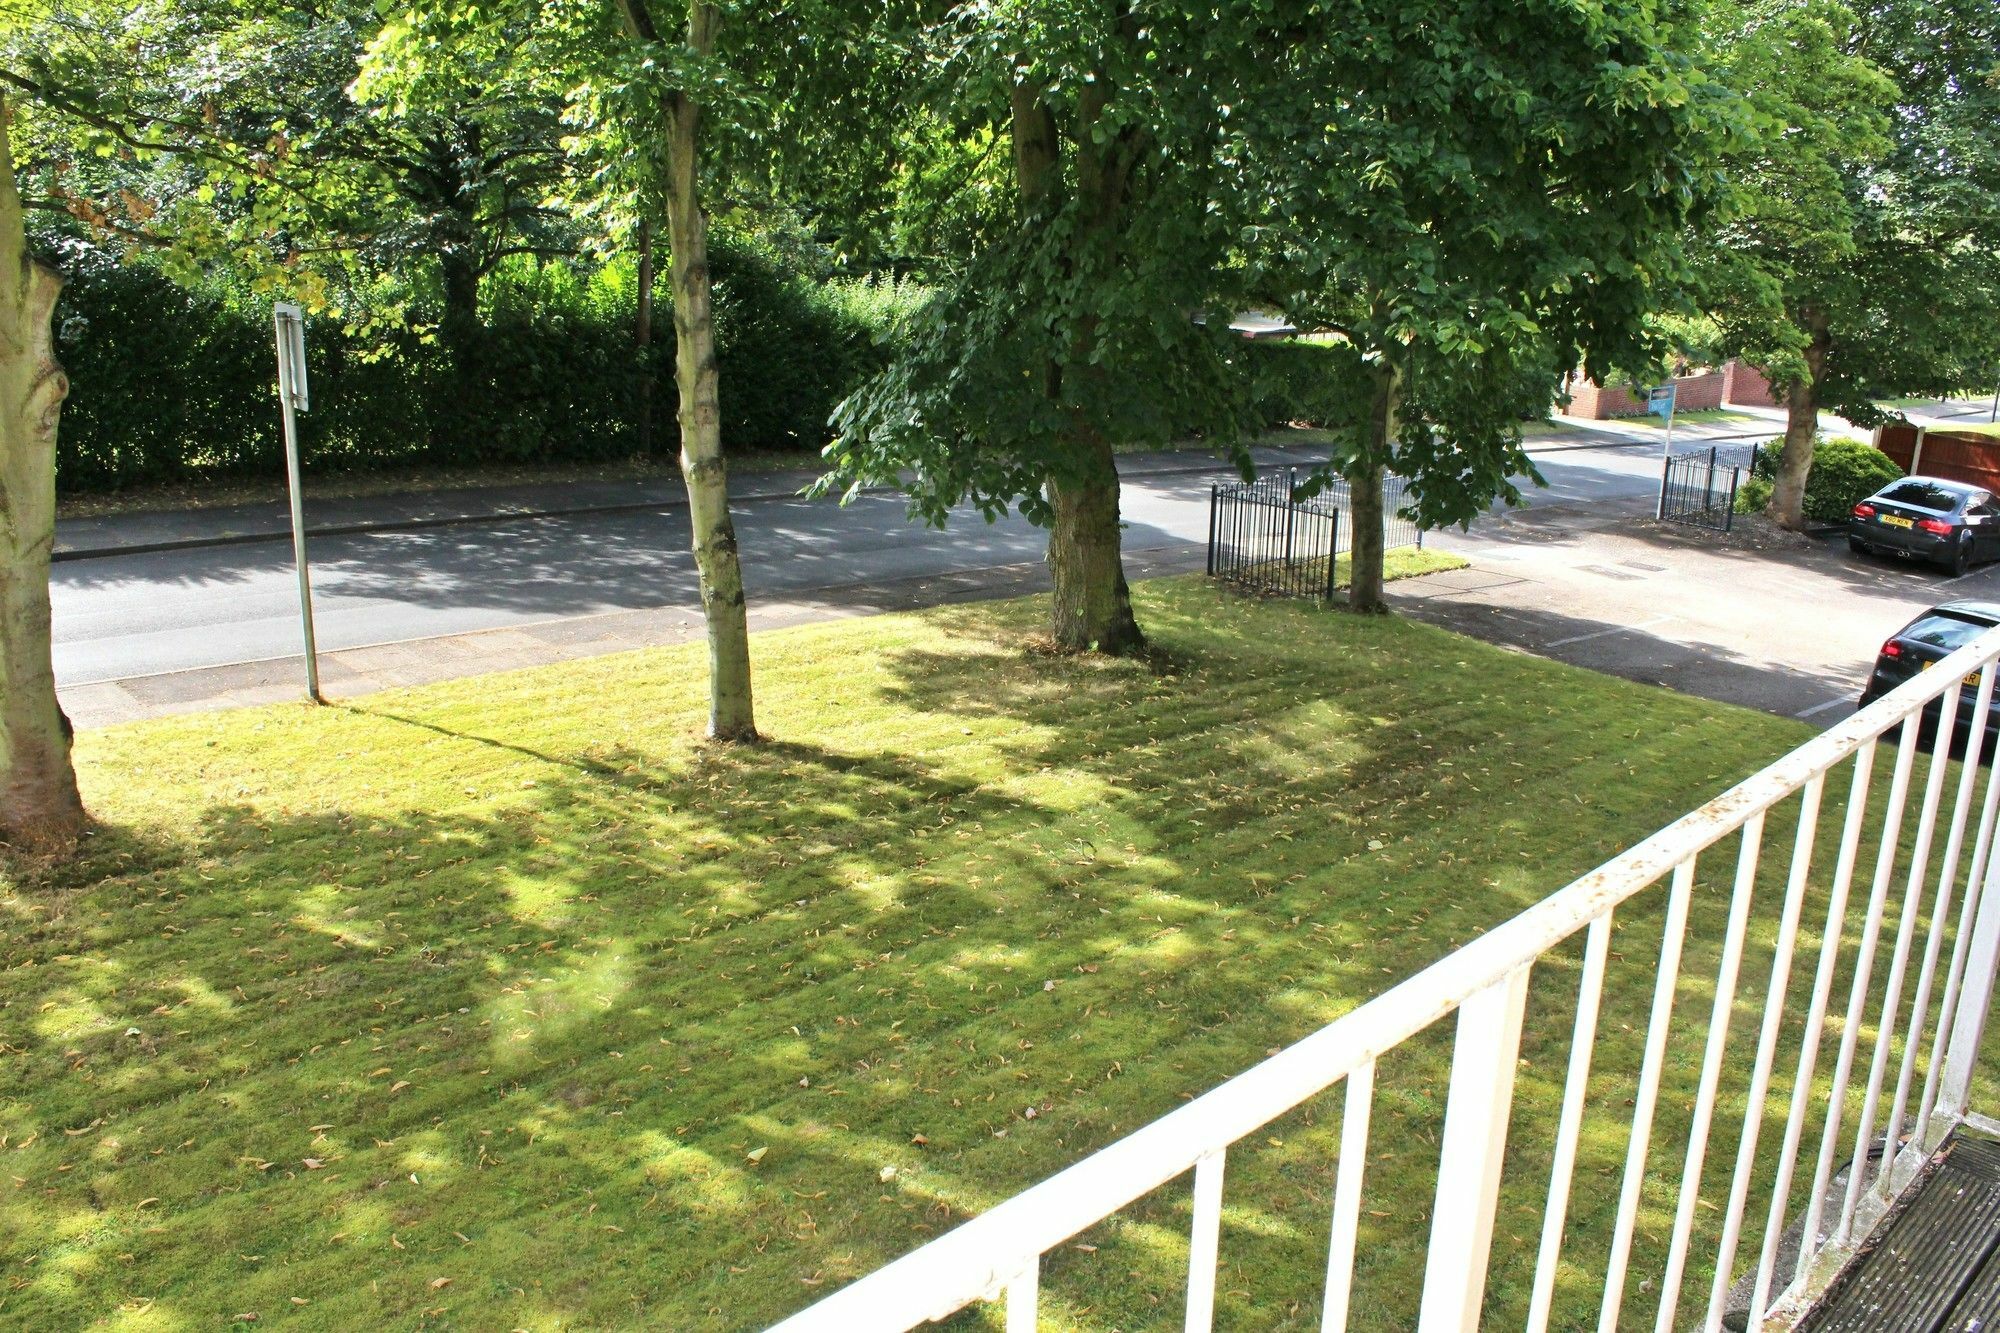 Boswell - Large Balcony Apartment & Parking - 2 Bedrooms - Close To Town & Racecourse Doncaster Exterior foto